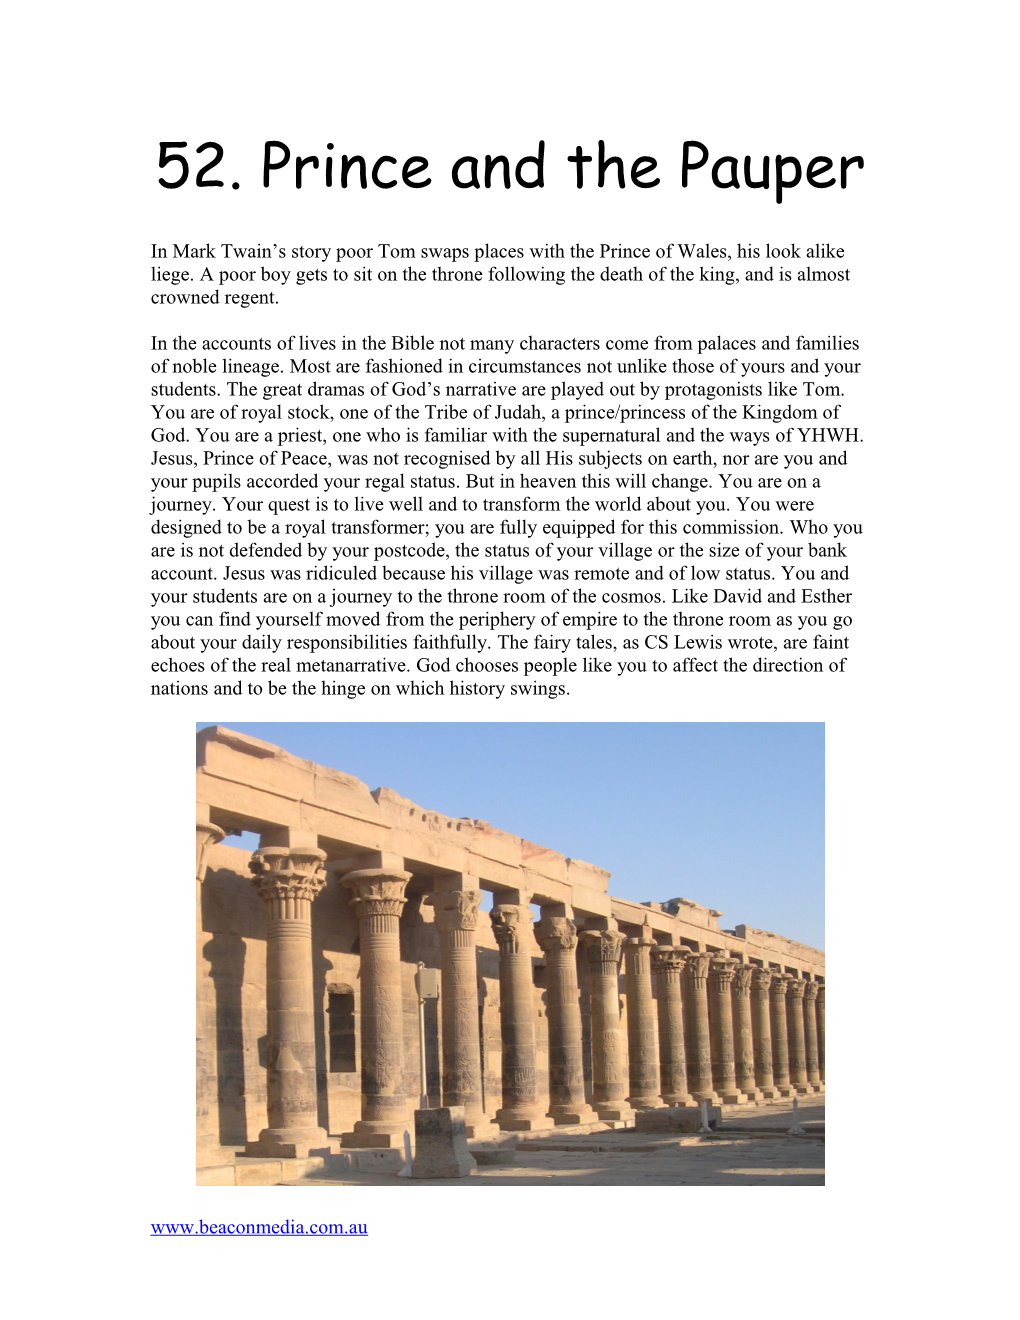 52. Prince and the Pauper